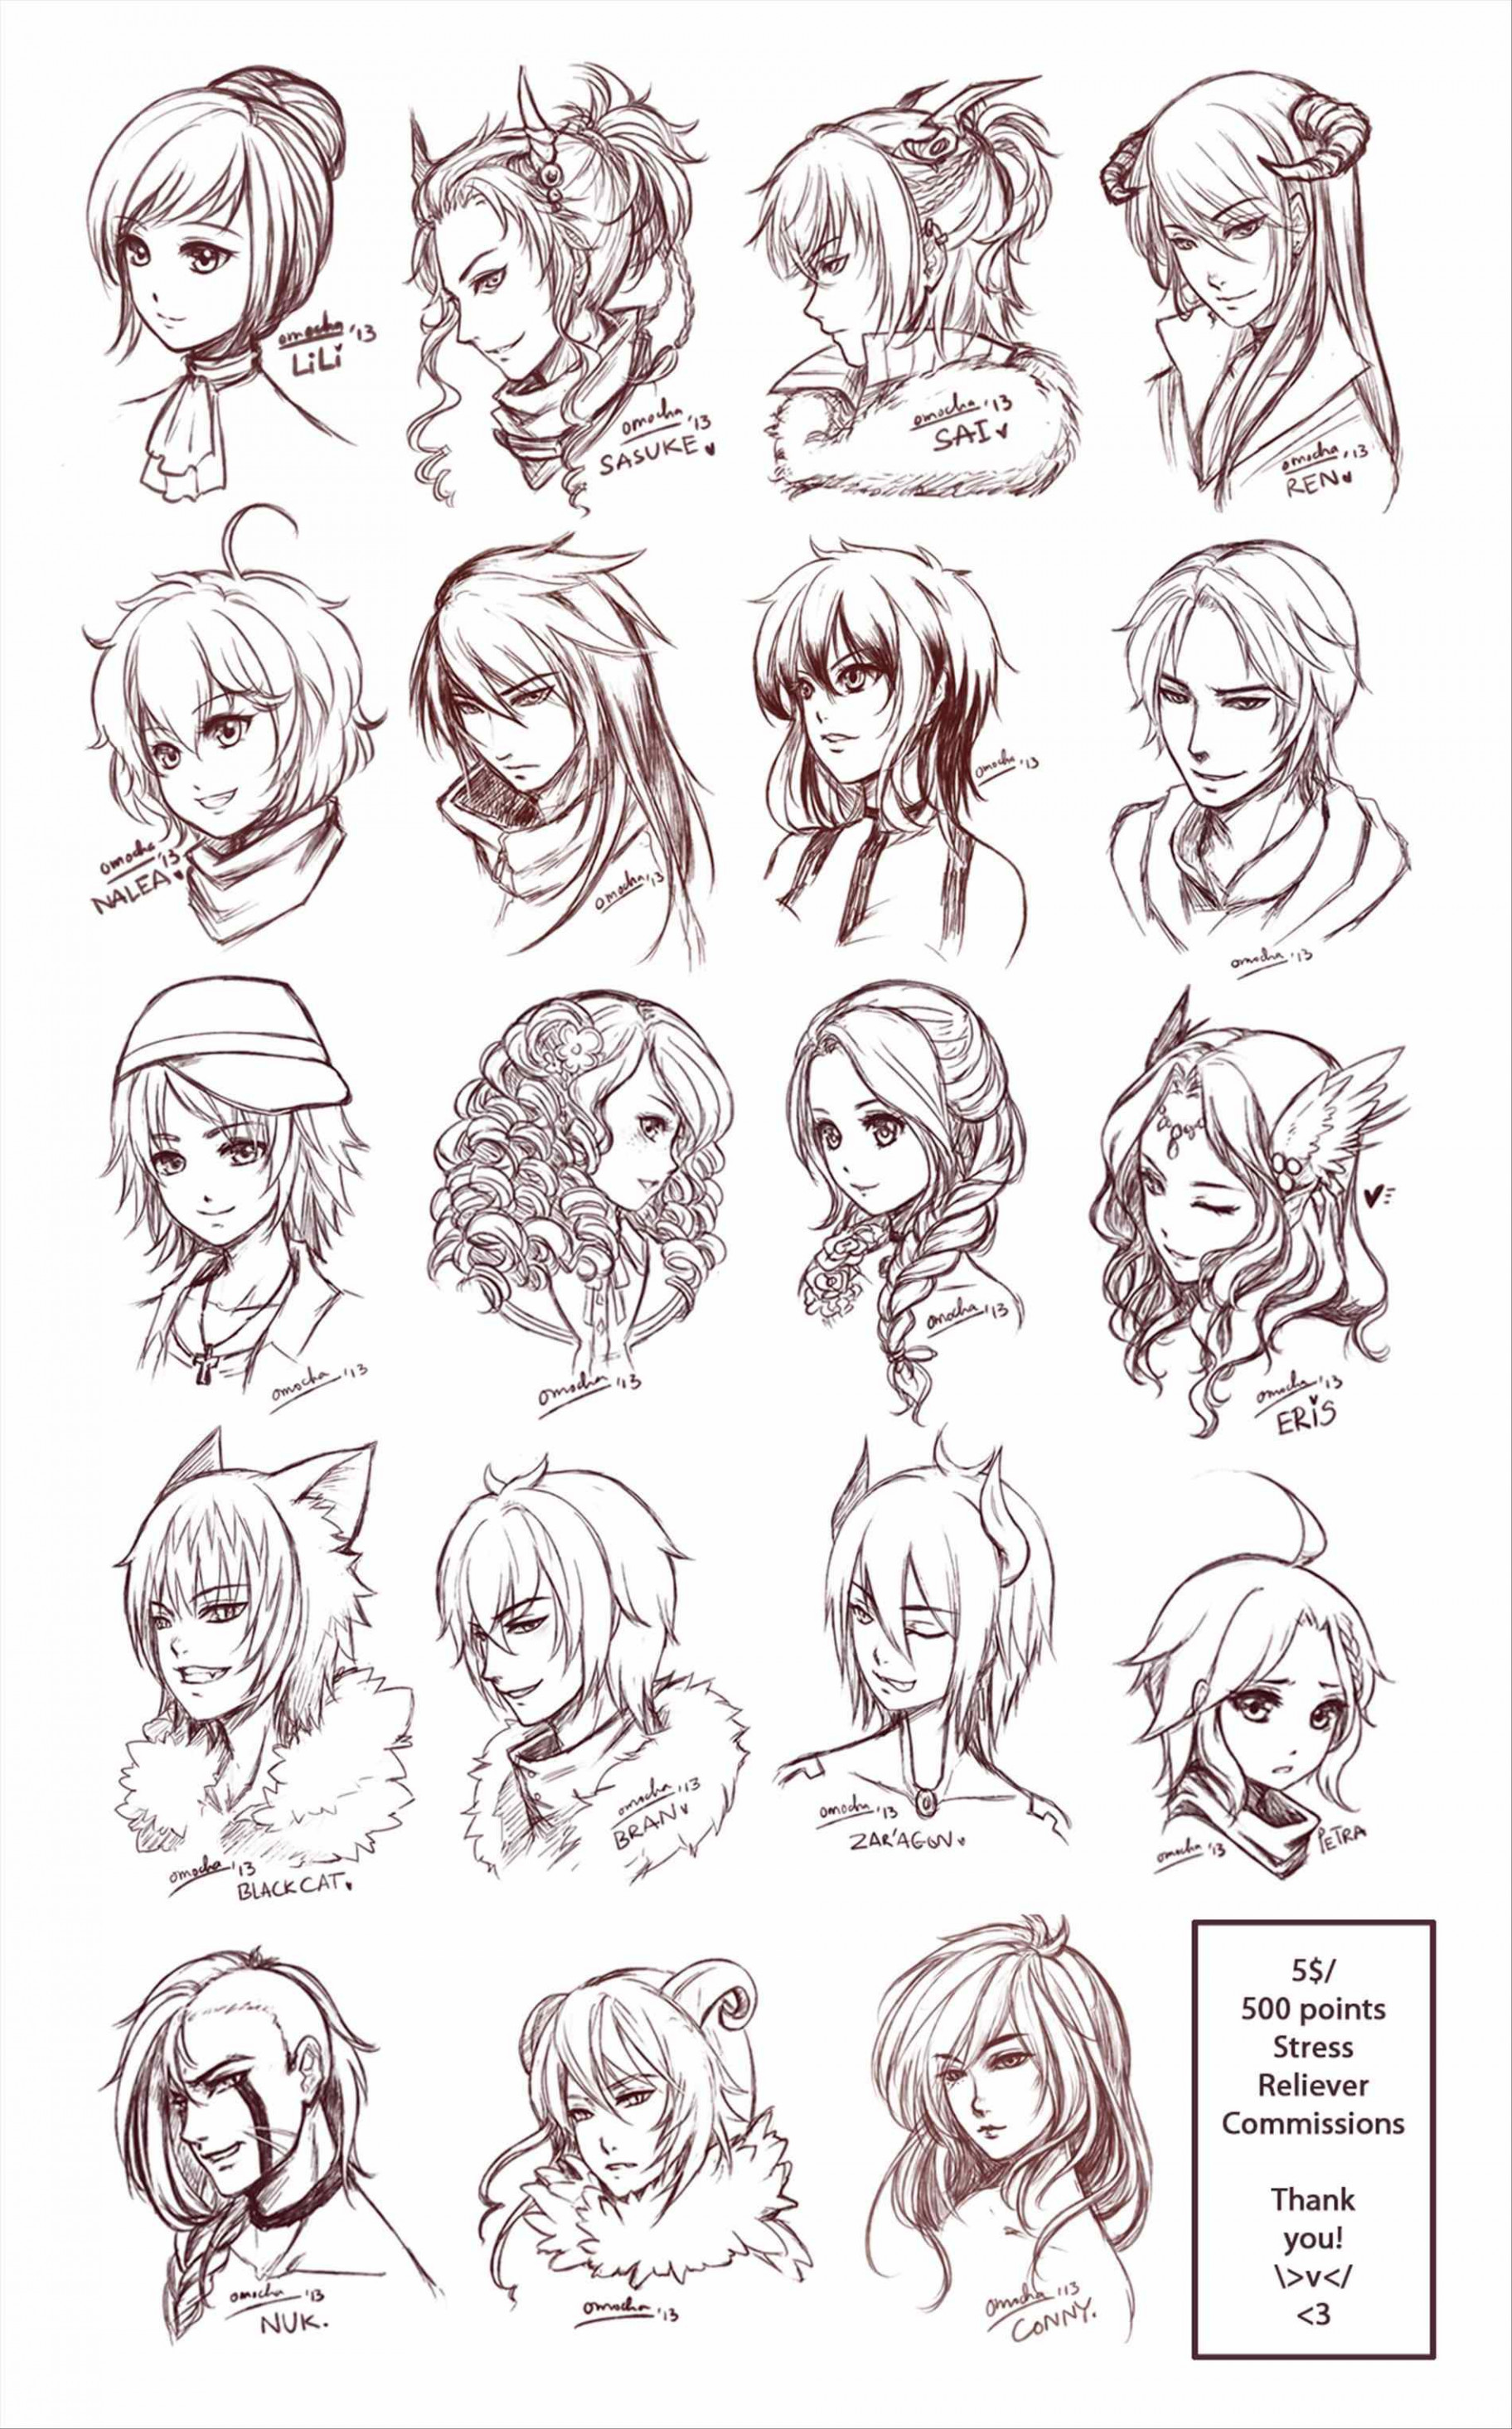 Short Hairstyle Drawings - Hairstyle Guides